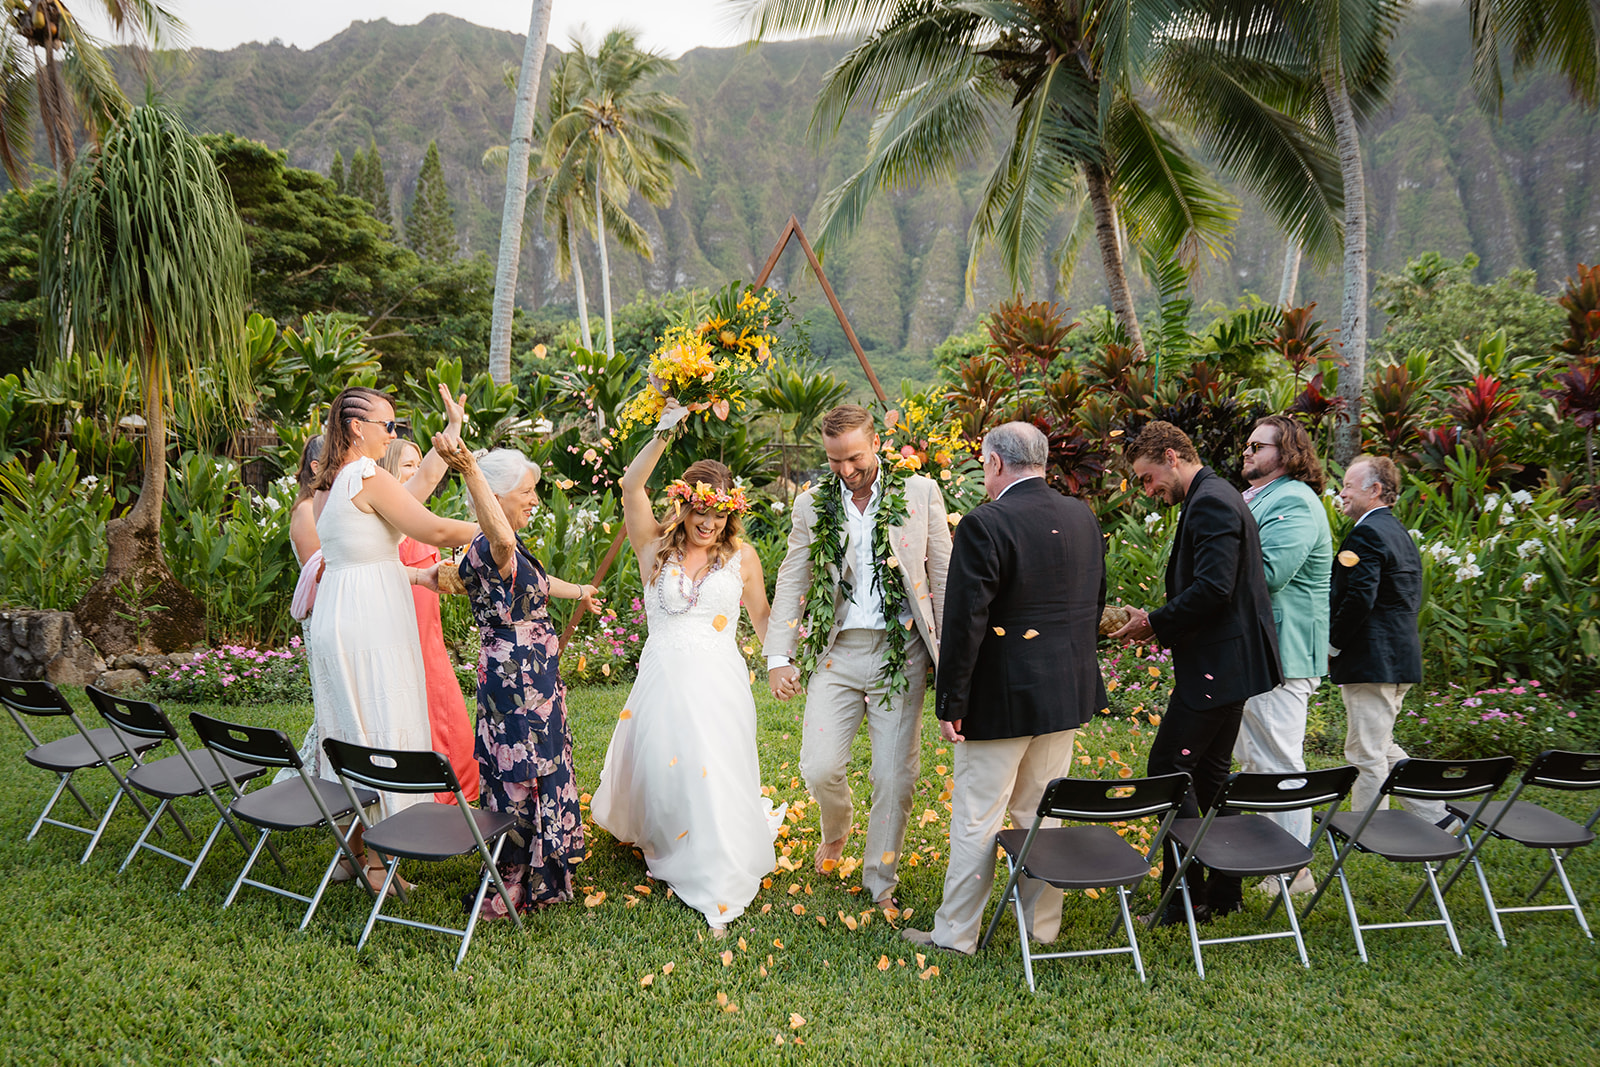 Petals are thrown as a couple walks down the aisle after their oahu wedding ceremony at Open Palms Plantation venue